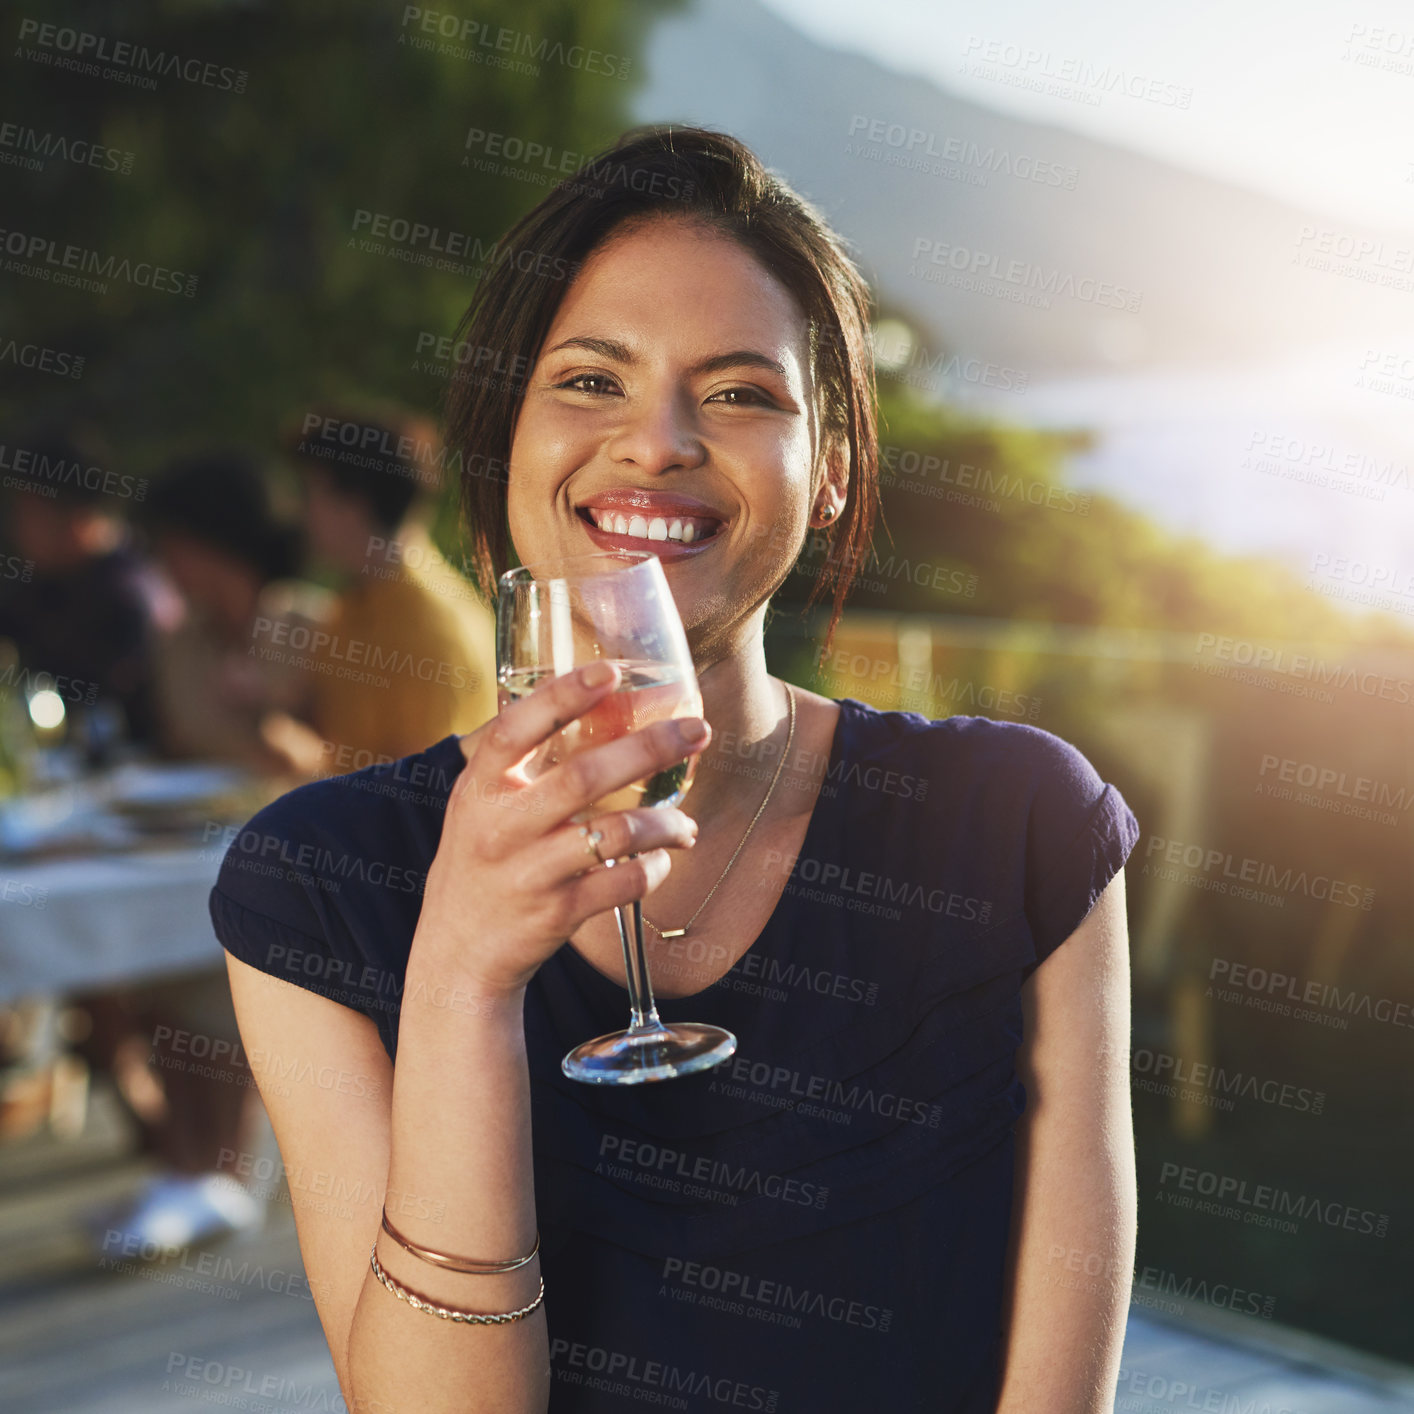 Buy stock photo Shot of an attractive young woman enjoying a glass of wine outdoors with her friends in the background